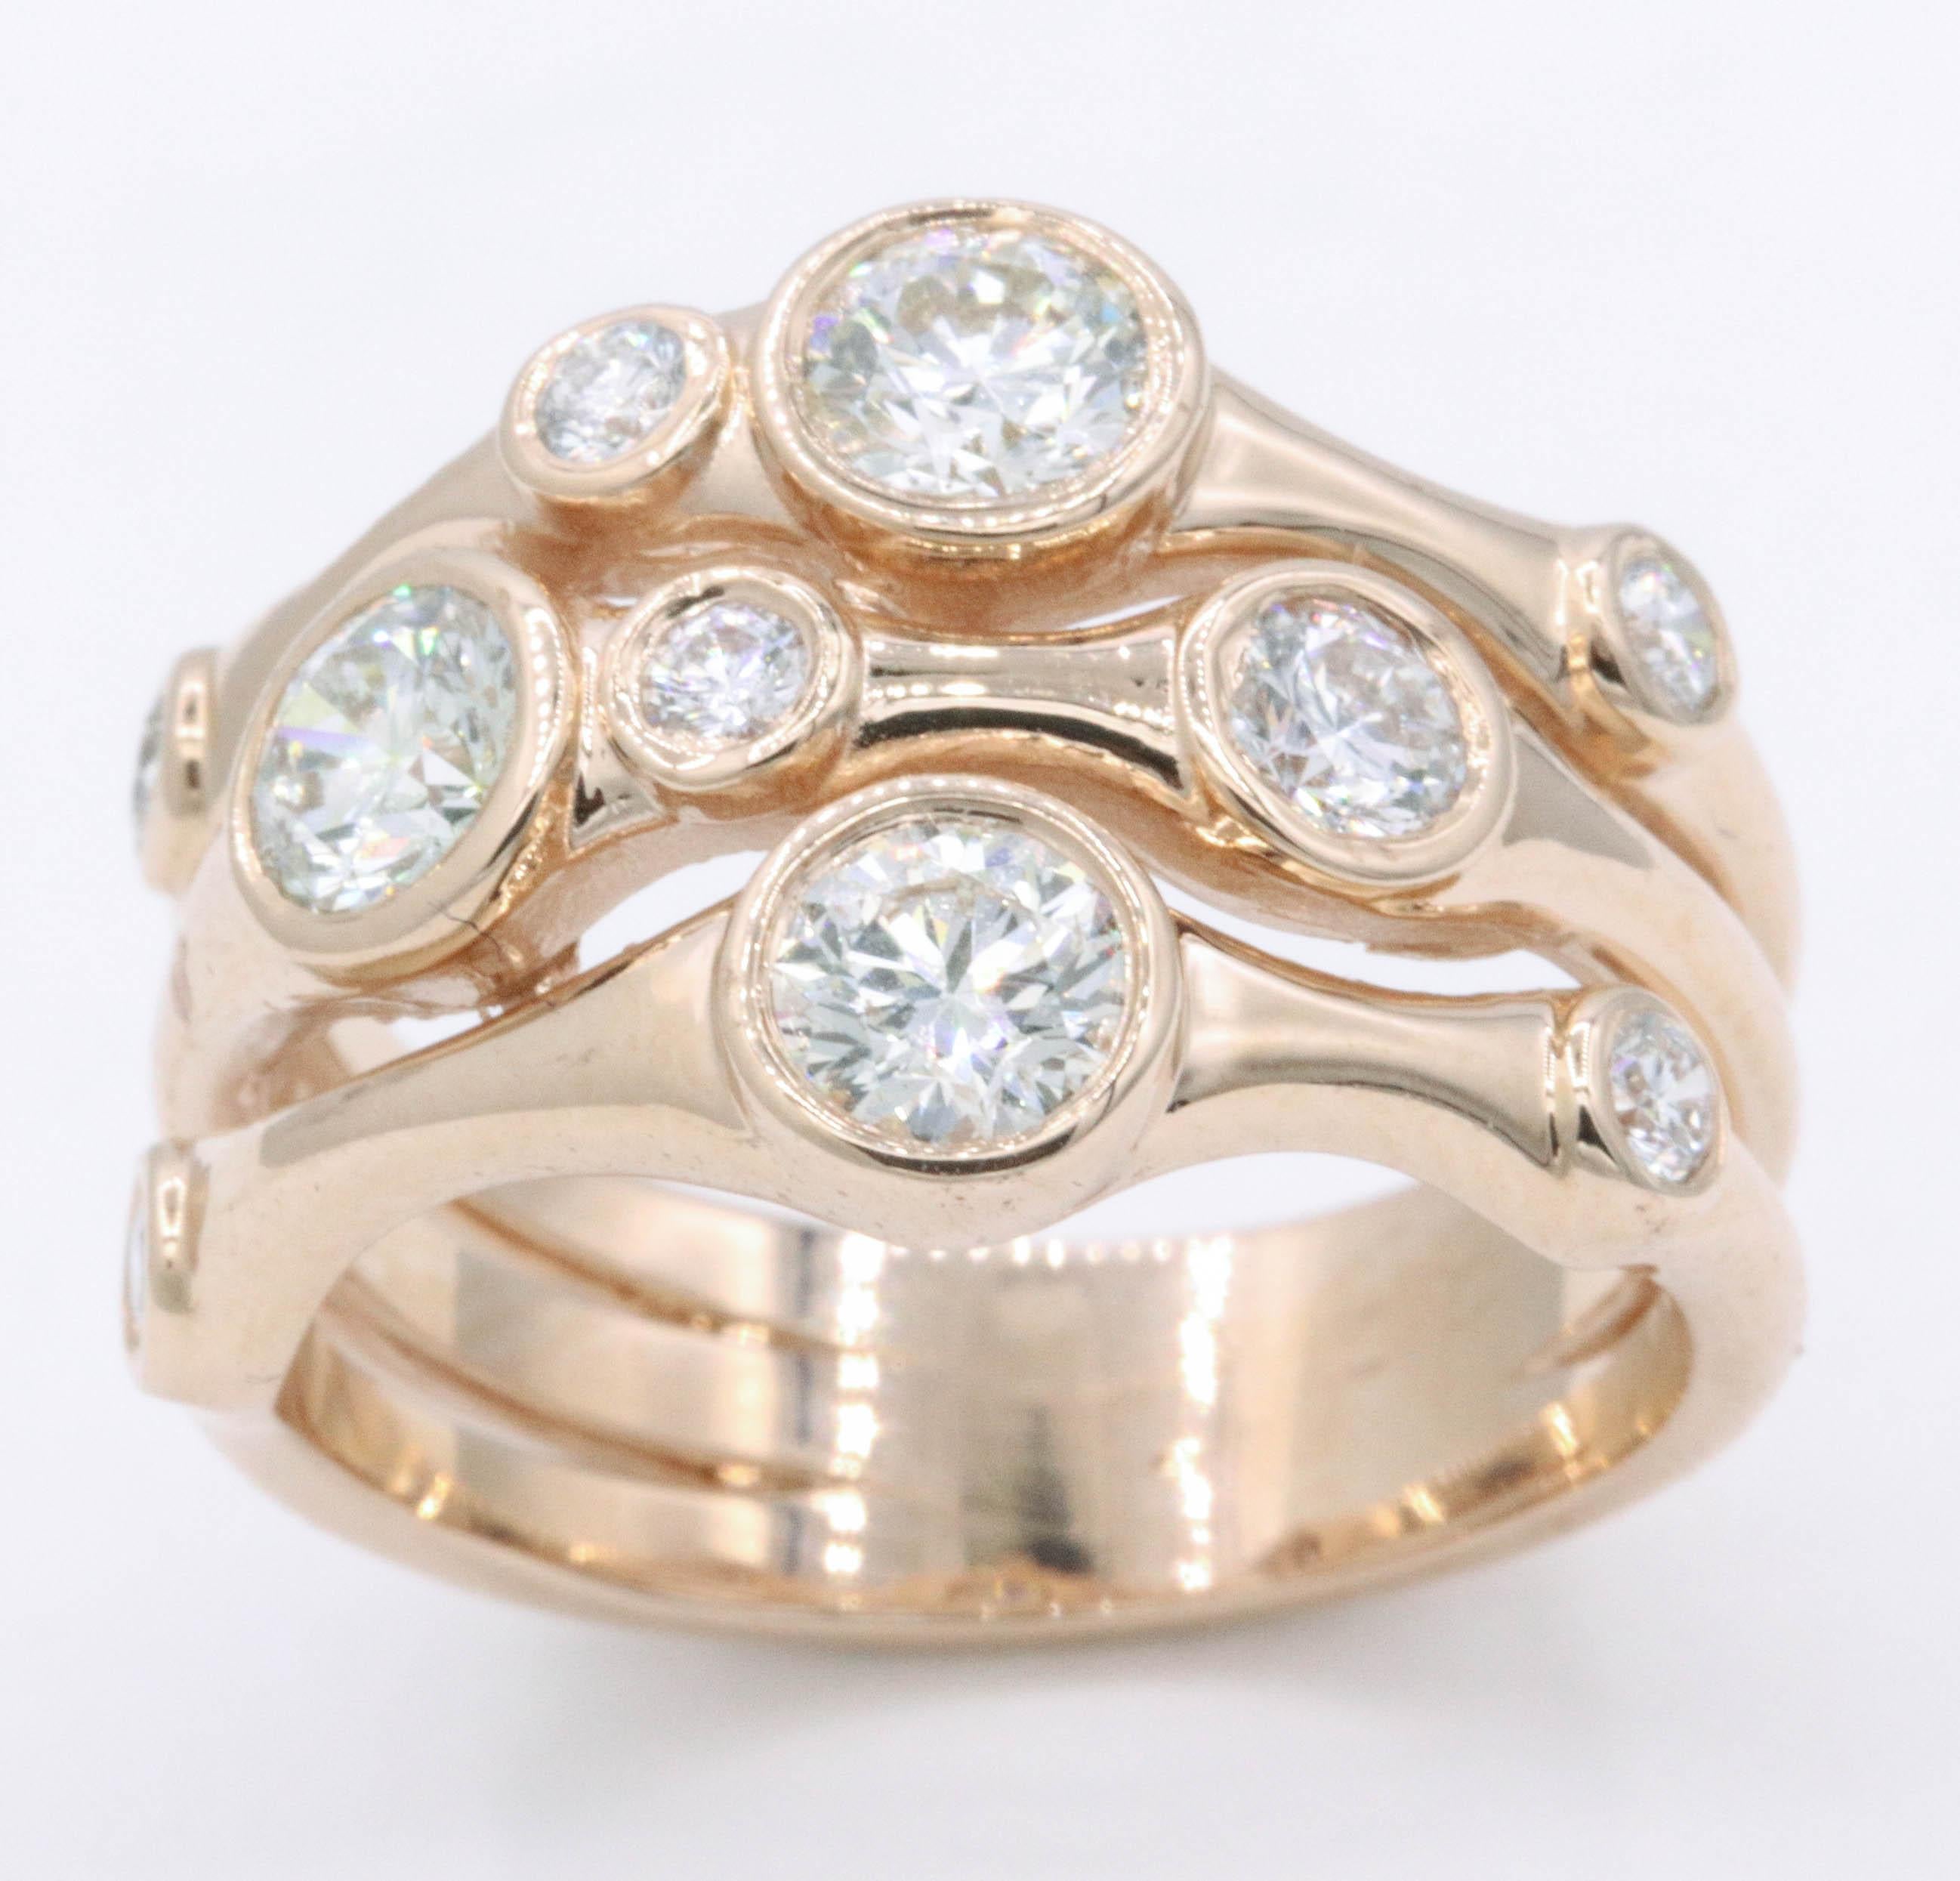 This 14 rose gold bubble ring features 10 round brilliants weighing 1.34 carats. 
Color: G-H
Clarity: SI
Also available in white and yellow gold. 
Size 6.5 